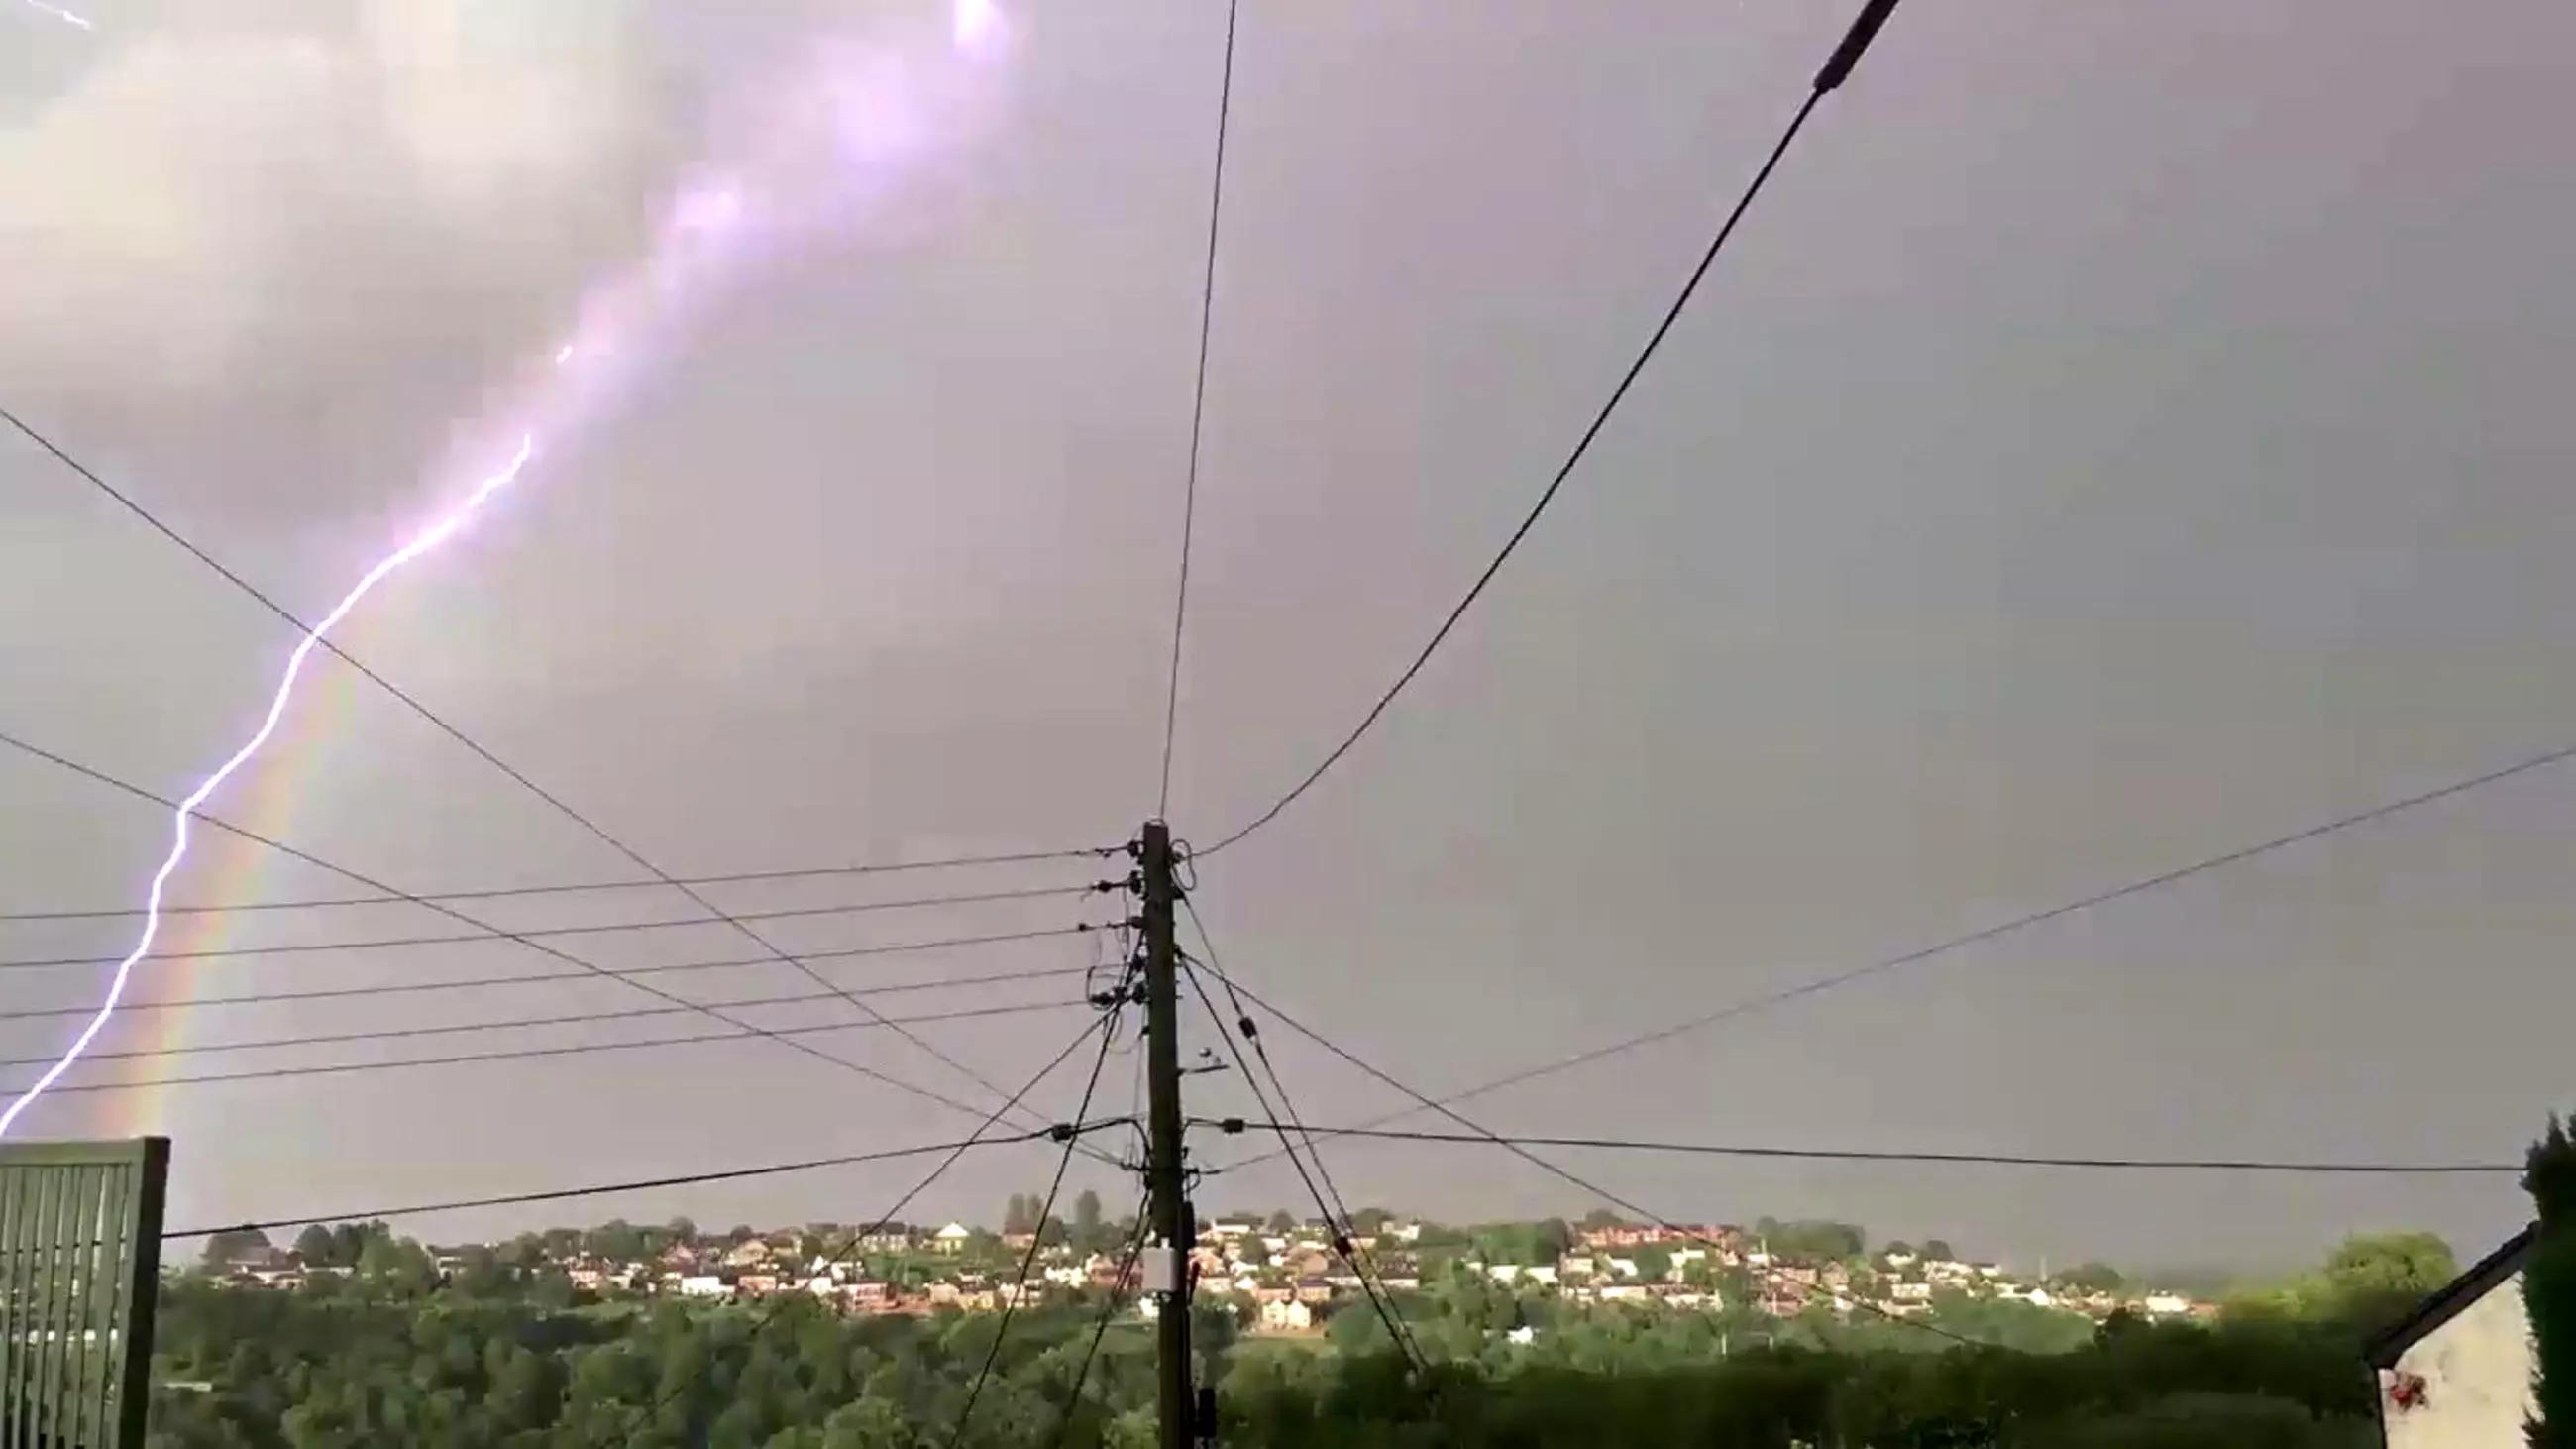 Remarkable 'One In A Million' Moment Bolt Of Lightning Strikes Curvature Of Rainbow